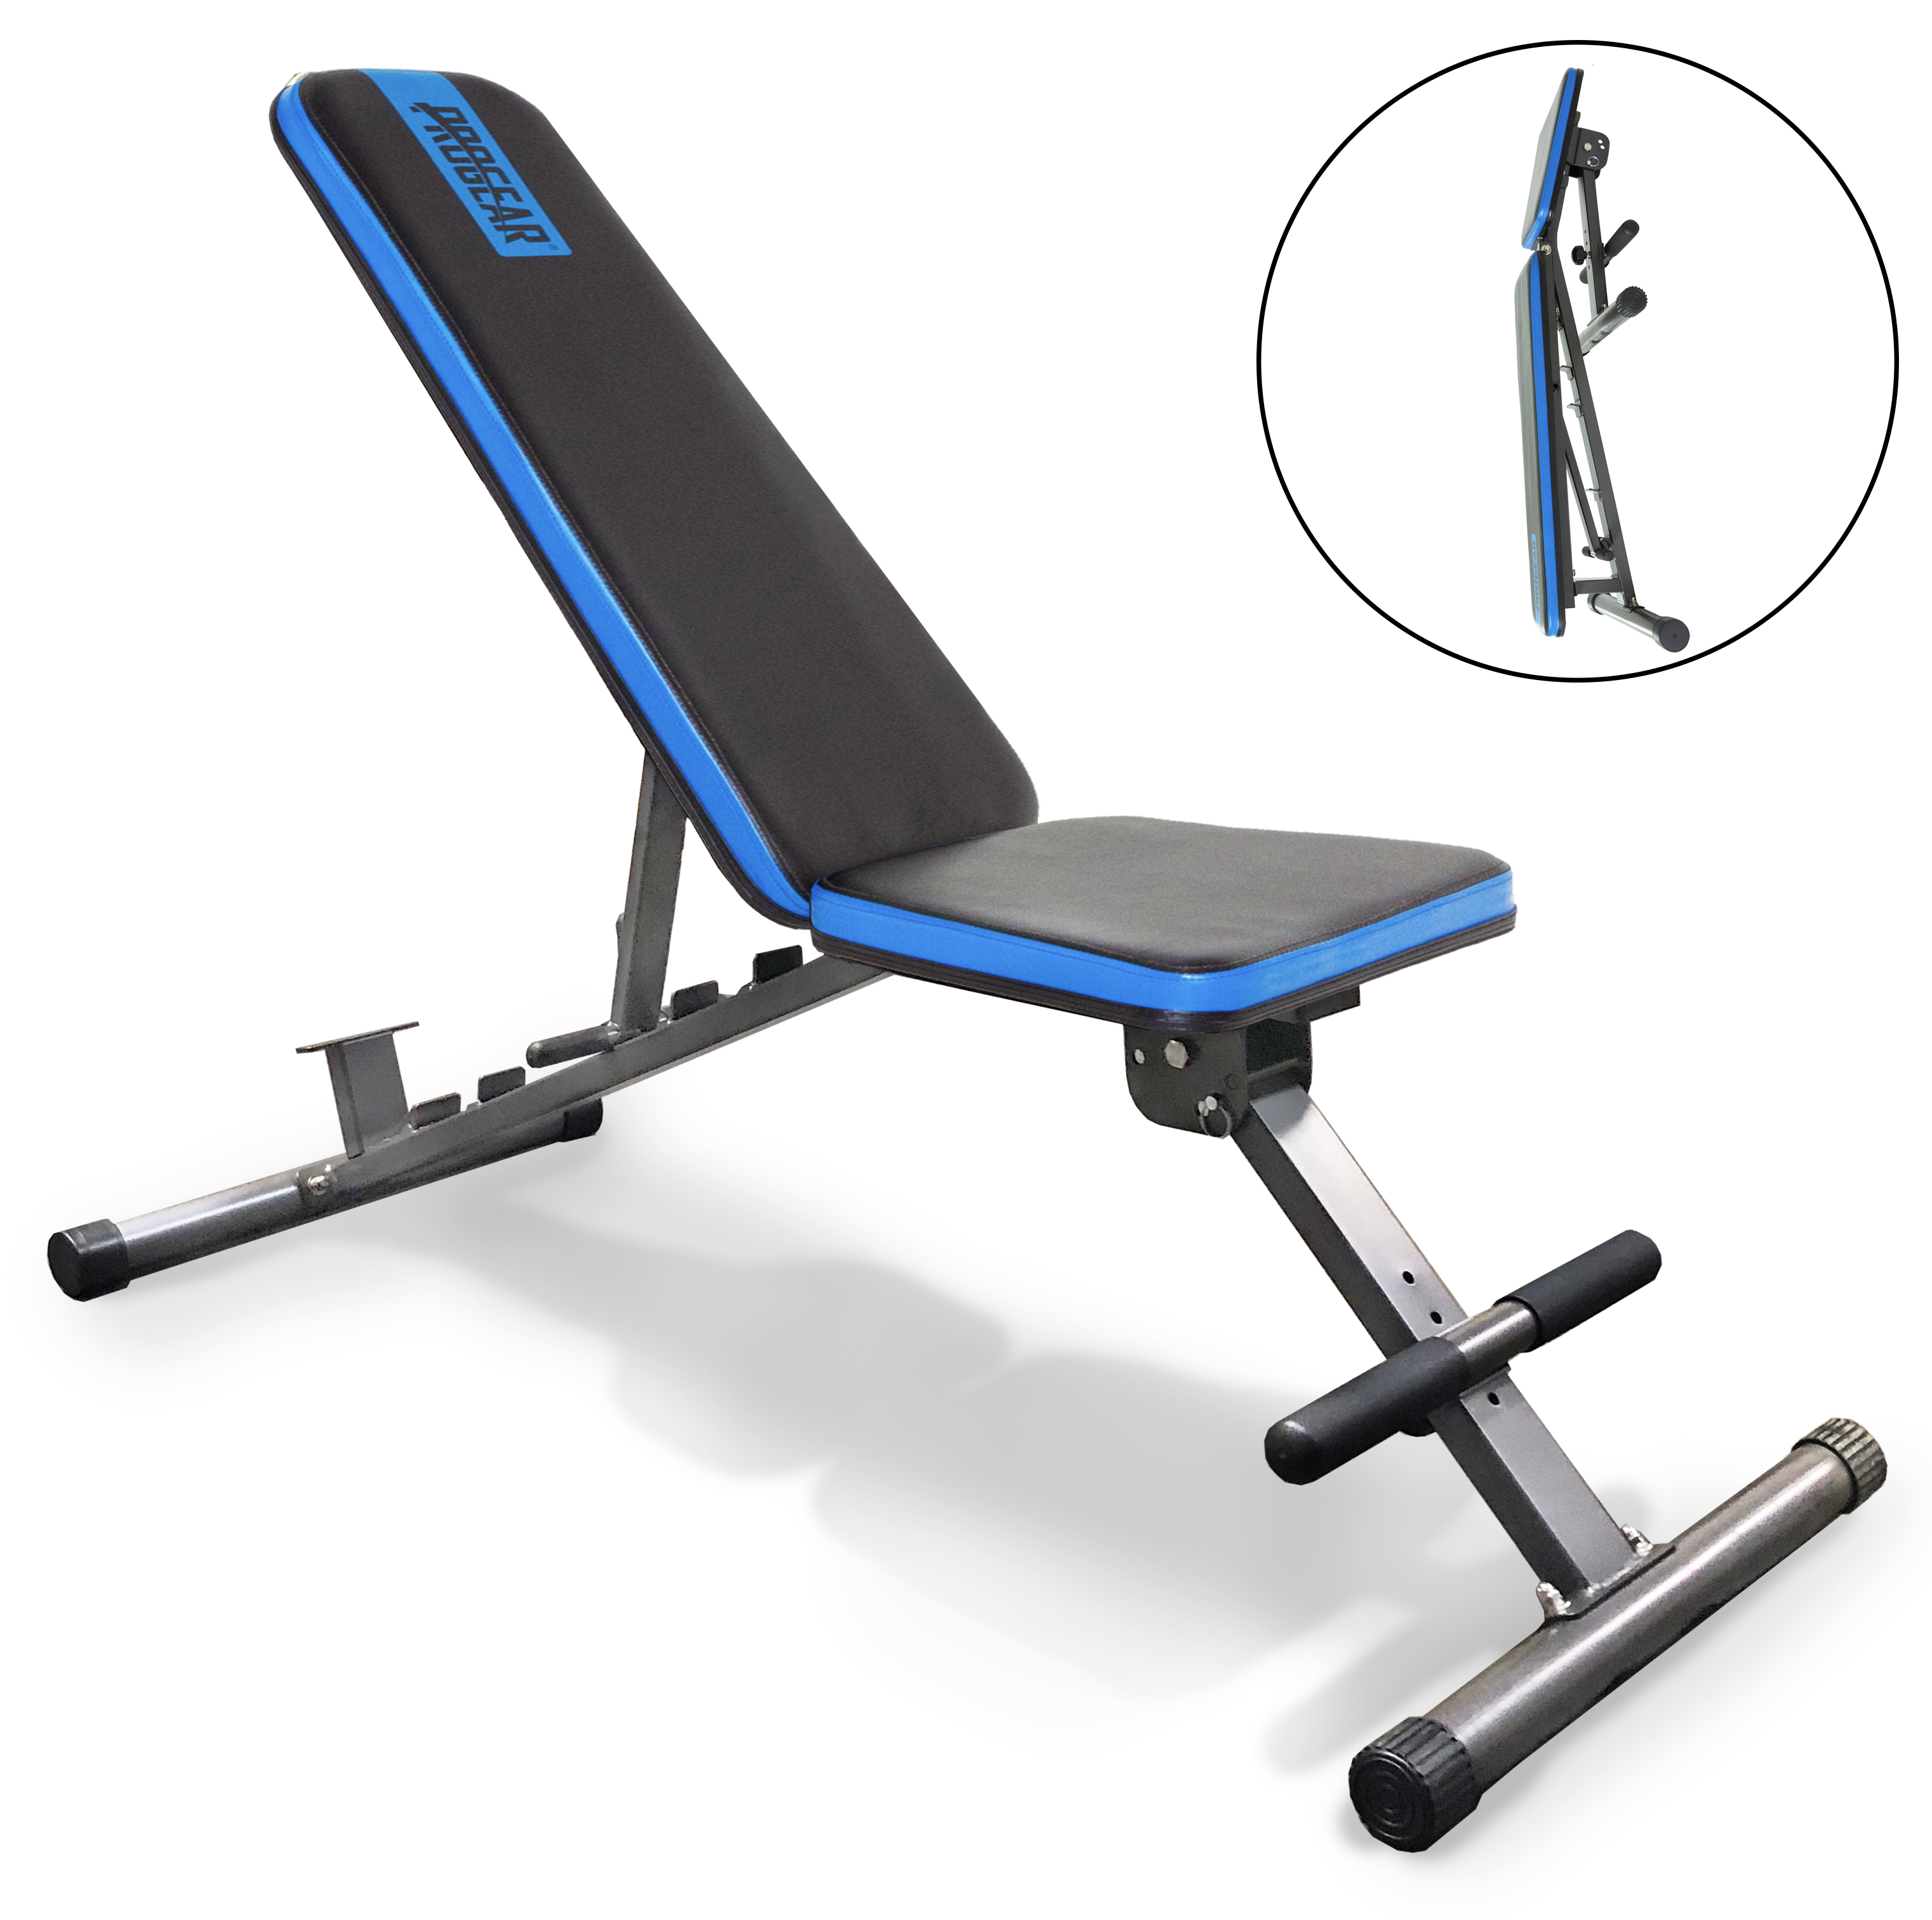 PROGEAR 1300 Adjustable 12 Position Weight Bench with an Extended 800lb Weight Capacity and Leg Hold Down - (Walmart) $84.99 (Free Shipping)